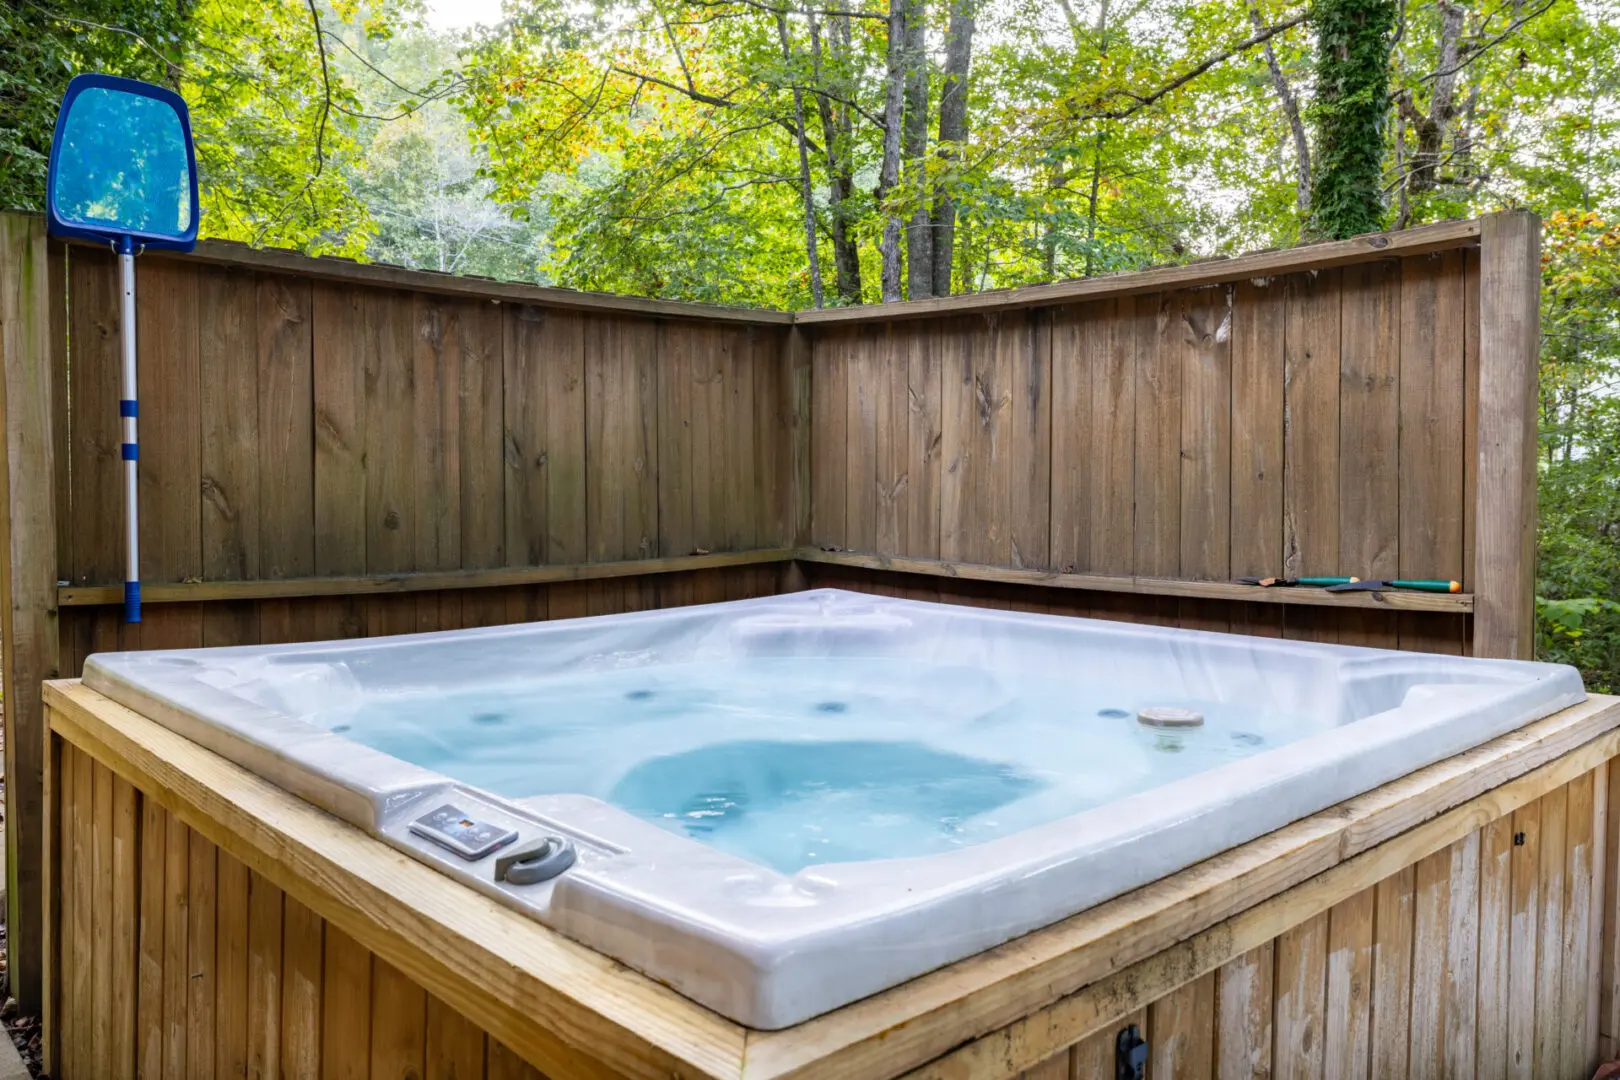 A hot tub in a wooded area.